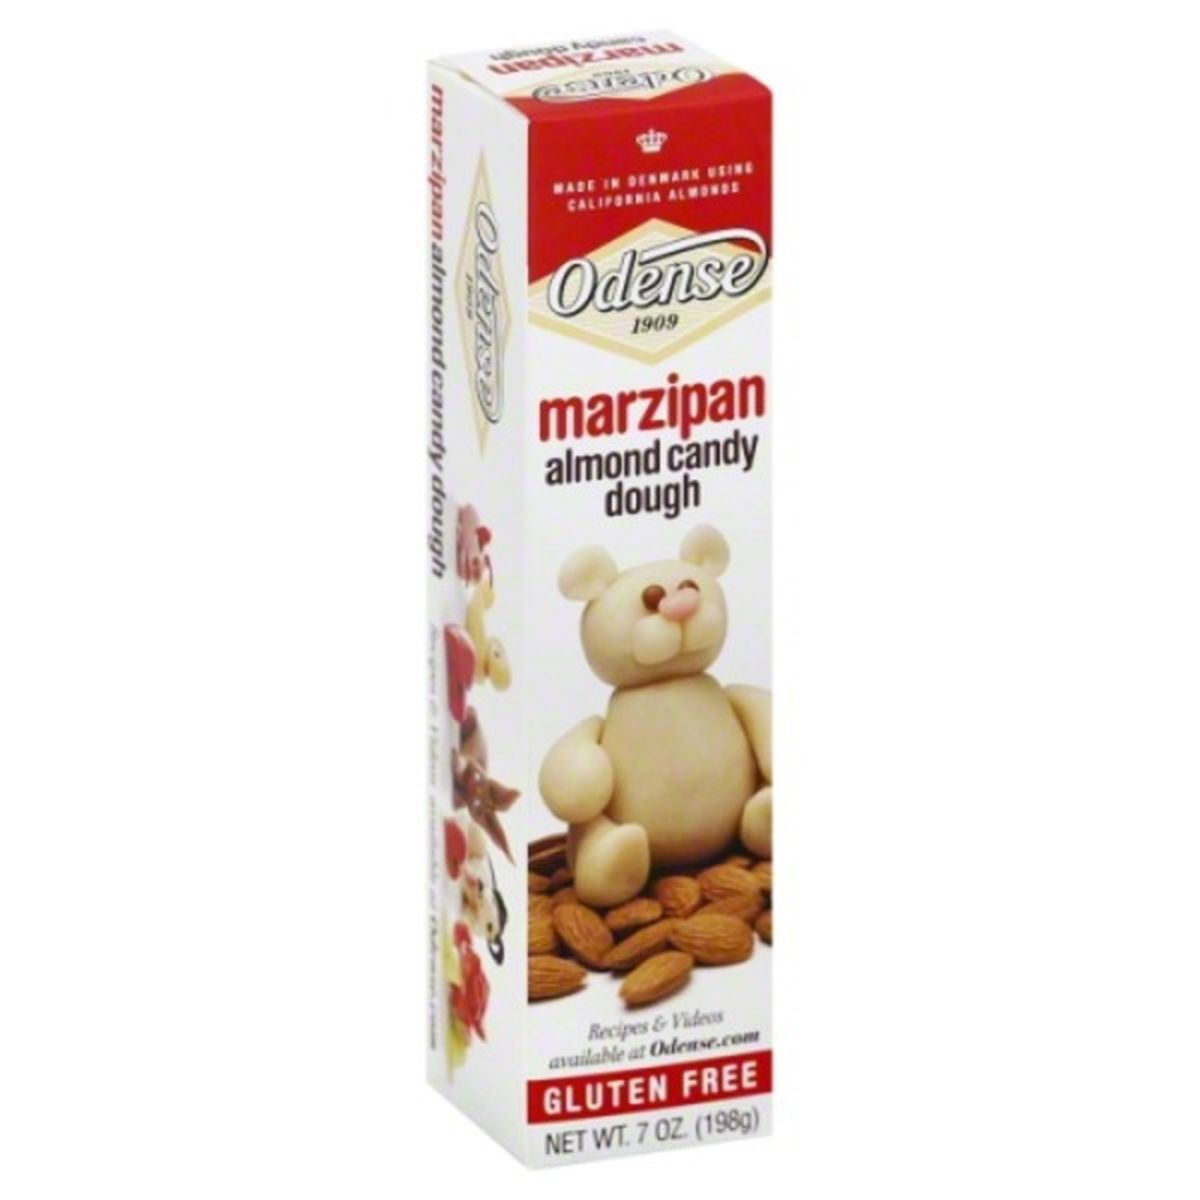 Calories in Odense Marzipan